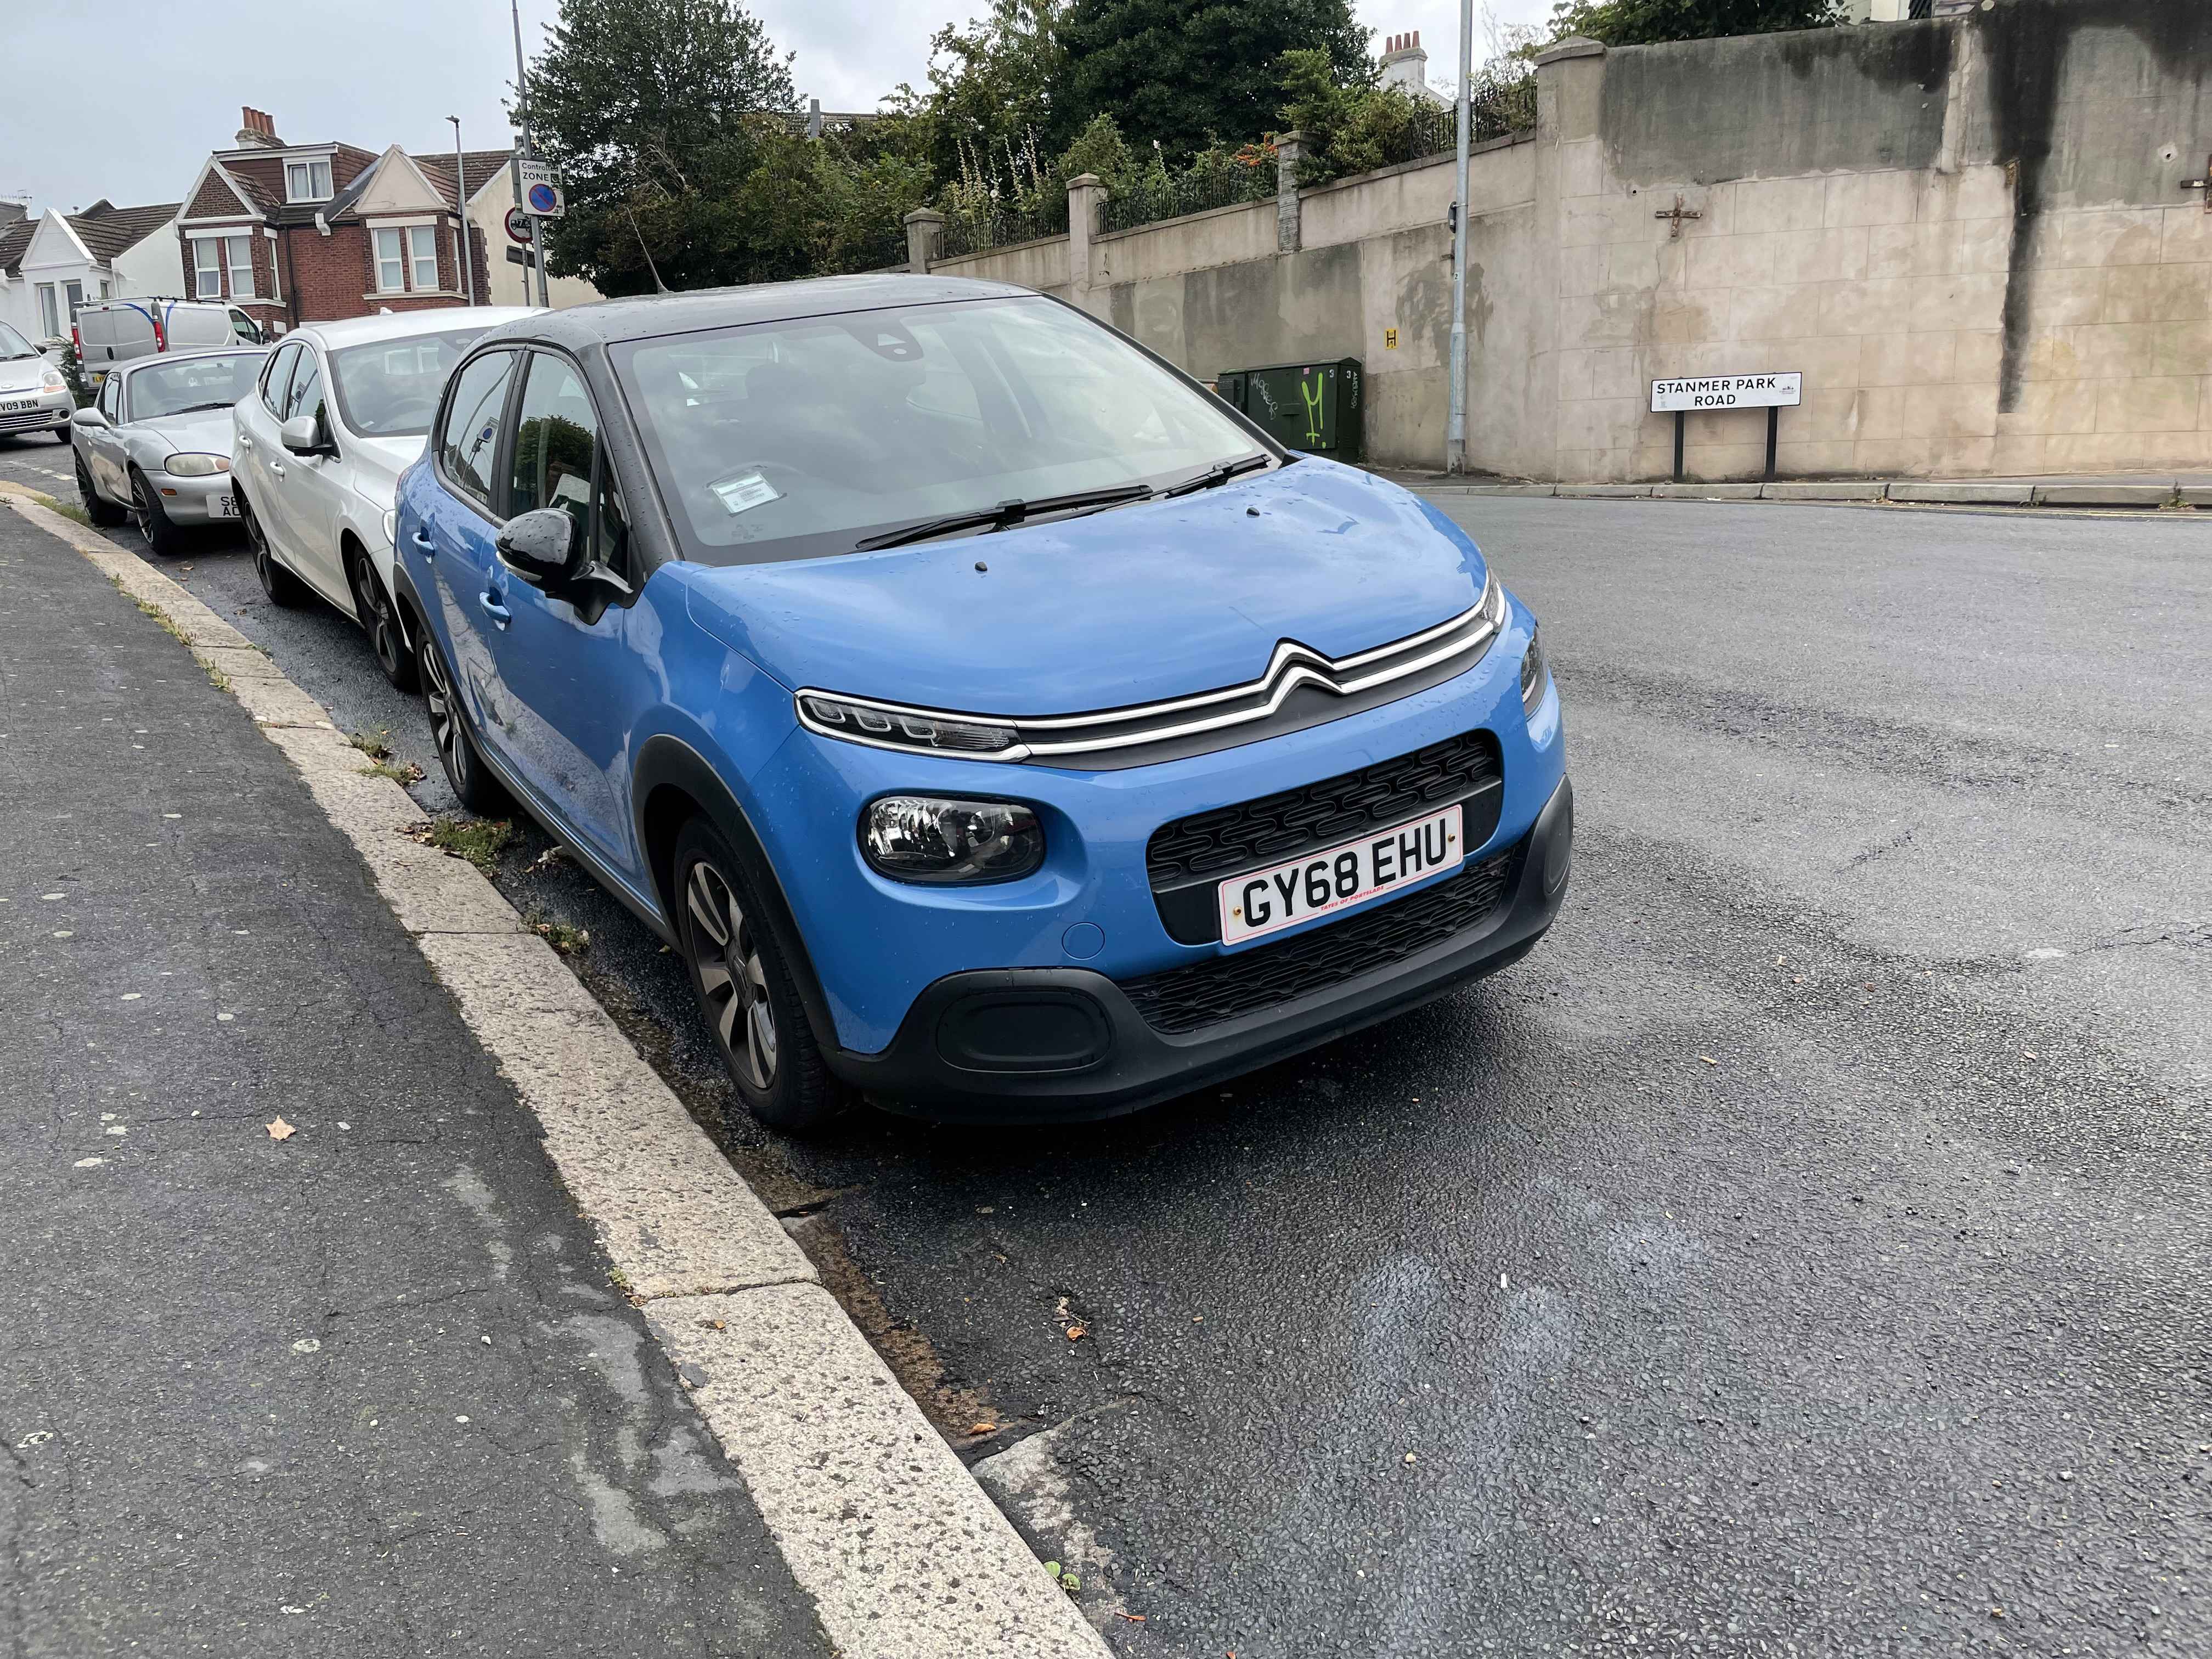 Photograph of GY68 EHU - a Blue Citroen C3 parked in Hollingdean by a non-resident who uses the local area as part of their Brighton commute. The third of twelve photographs supplied by the residents of Hollingdean.